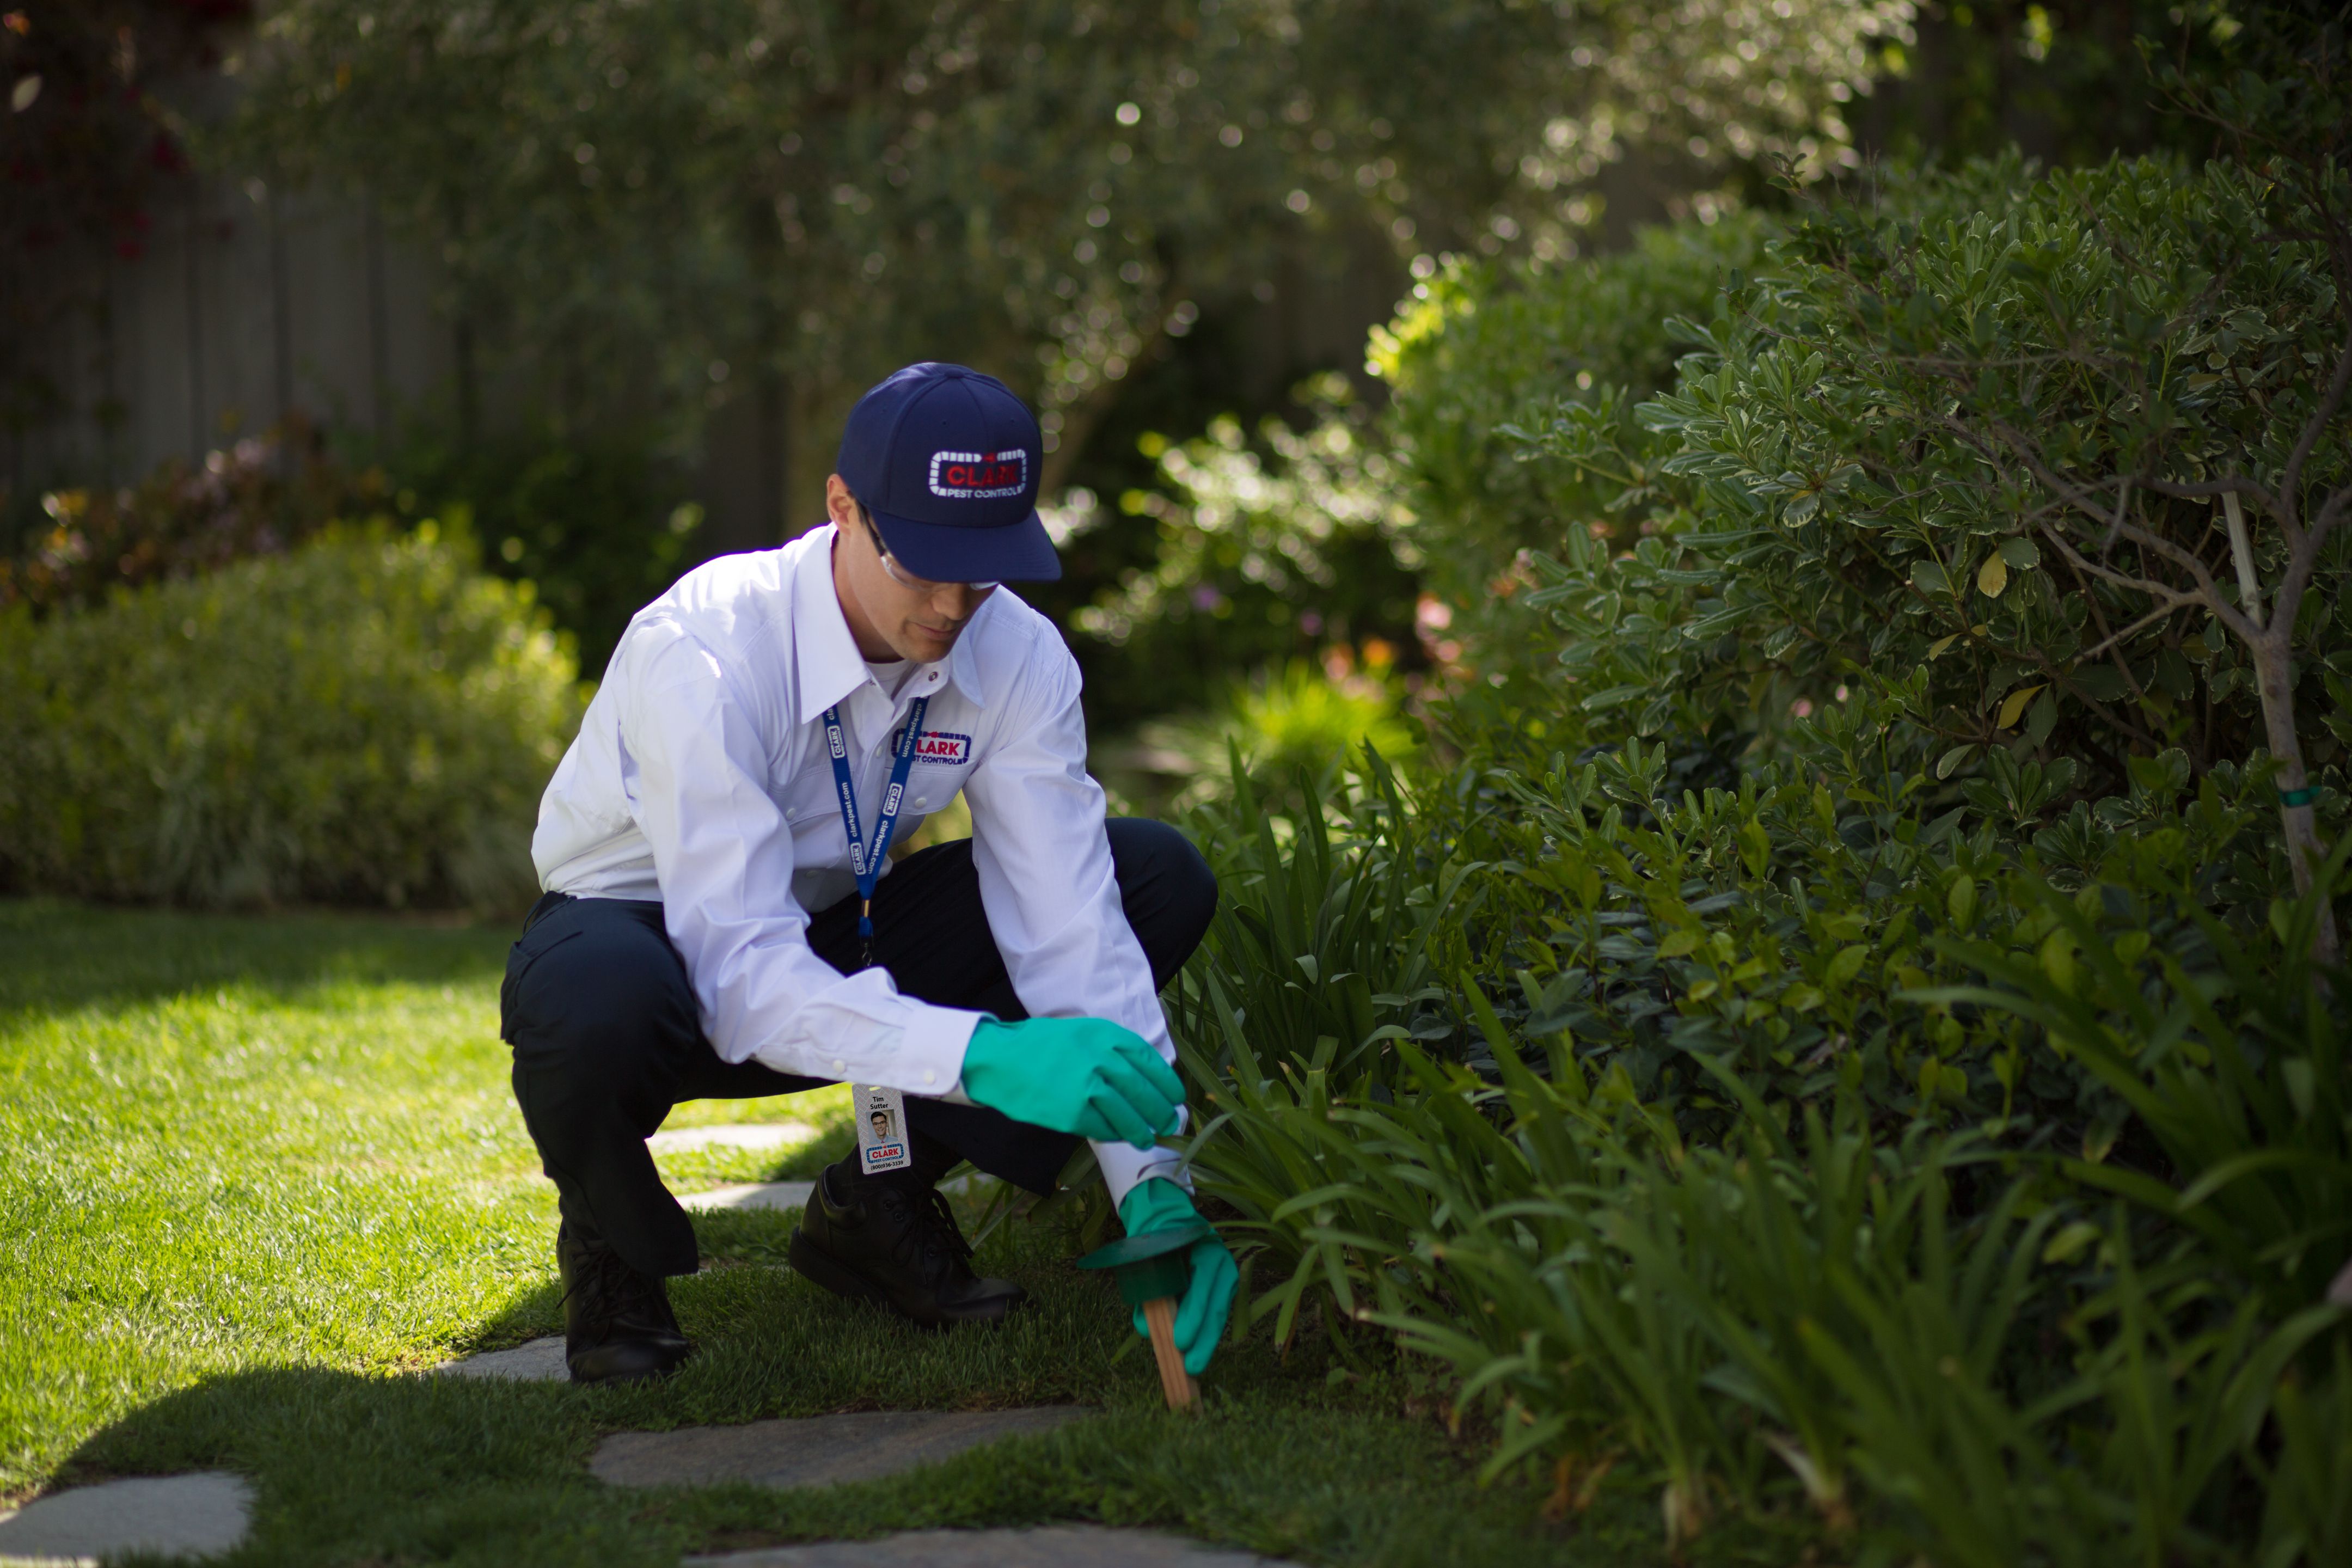 Clark Pest Control offers: Residential Pest Control, Commercial Pest Control, Lawn & Garden Services.